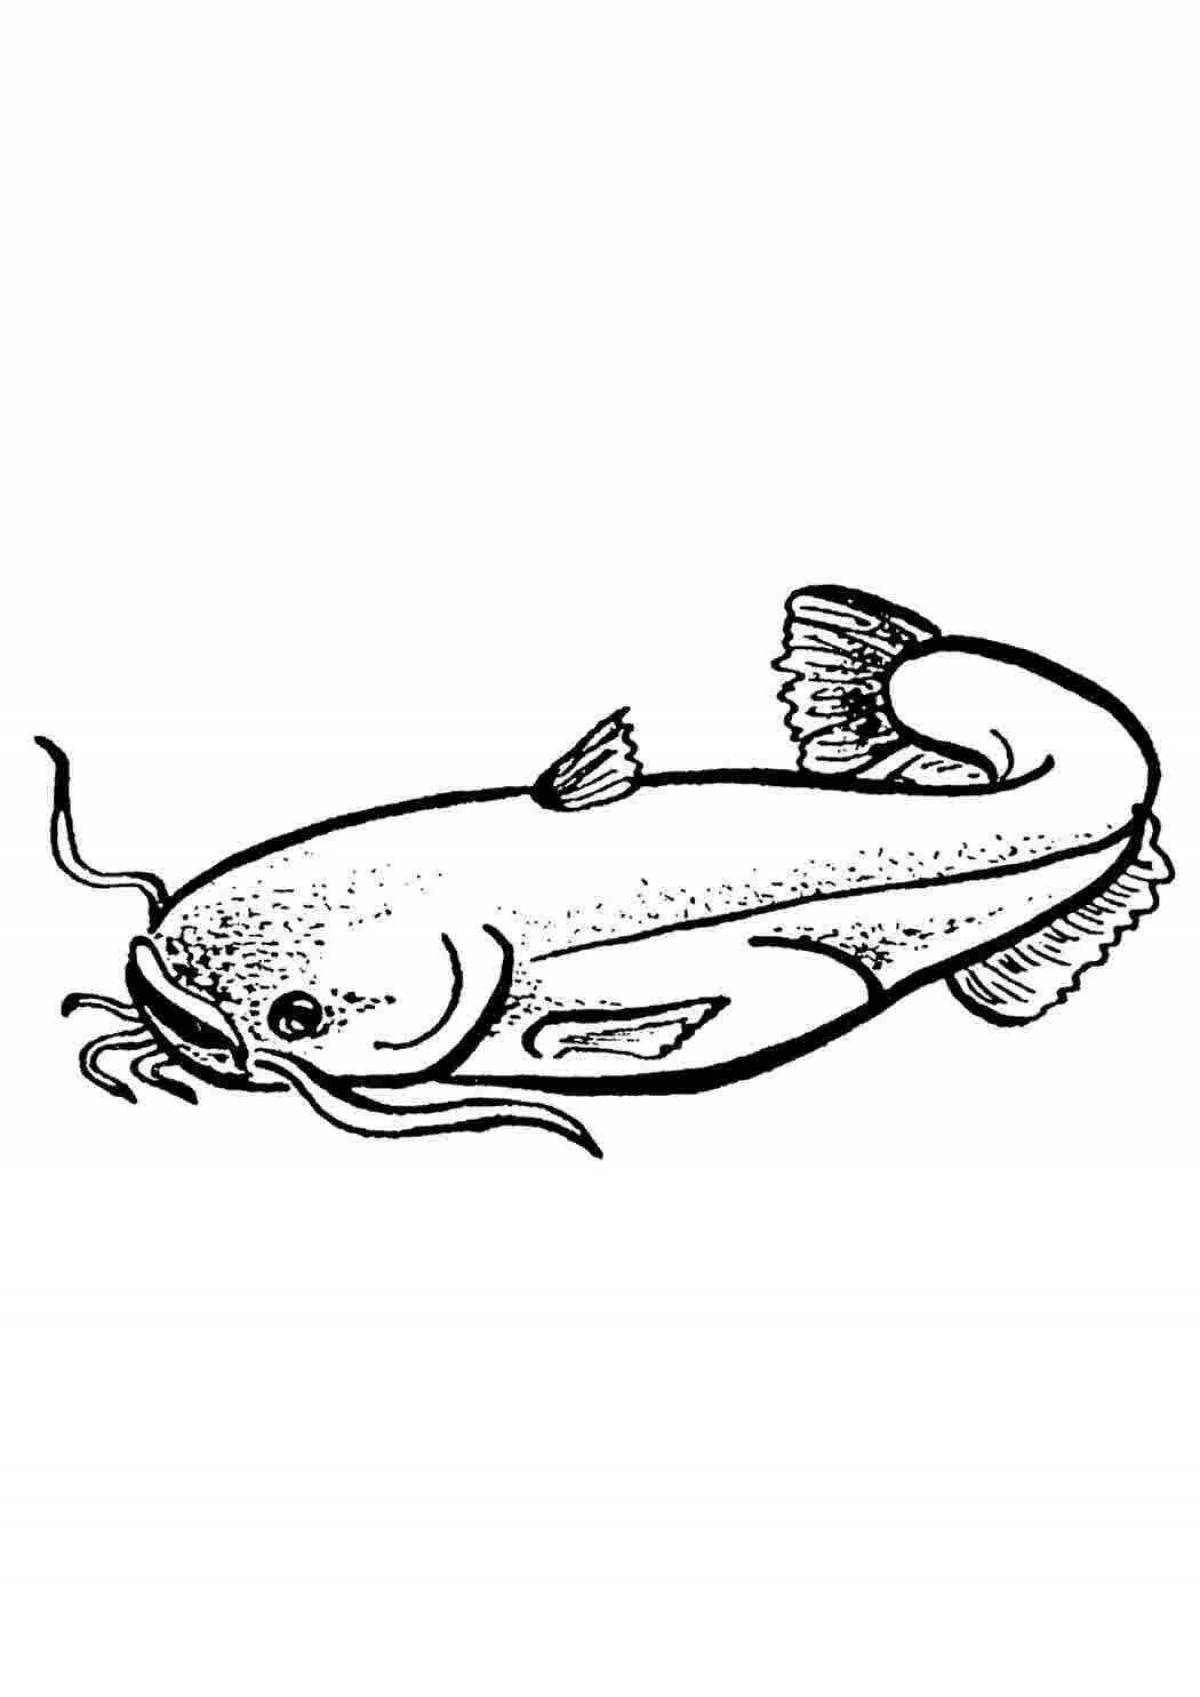 Outstanding catfish coloring page for the little ones